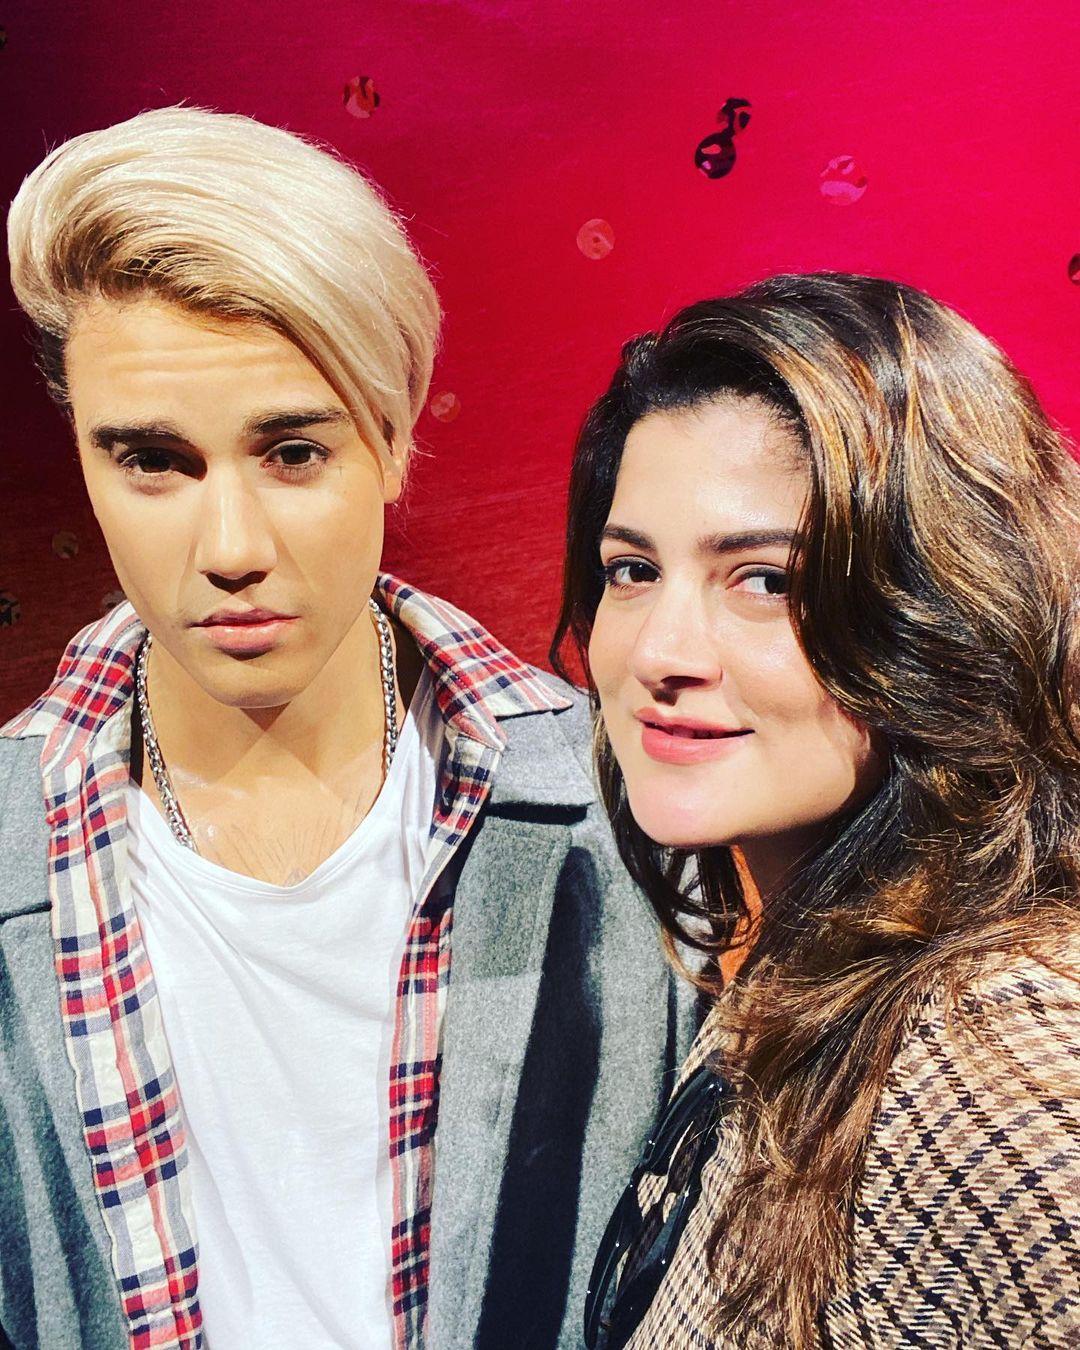 With Justin Bieber